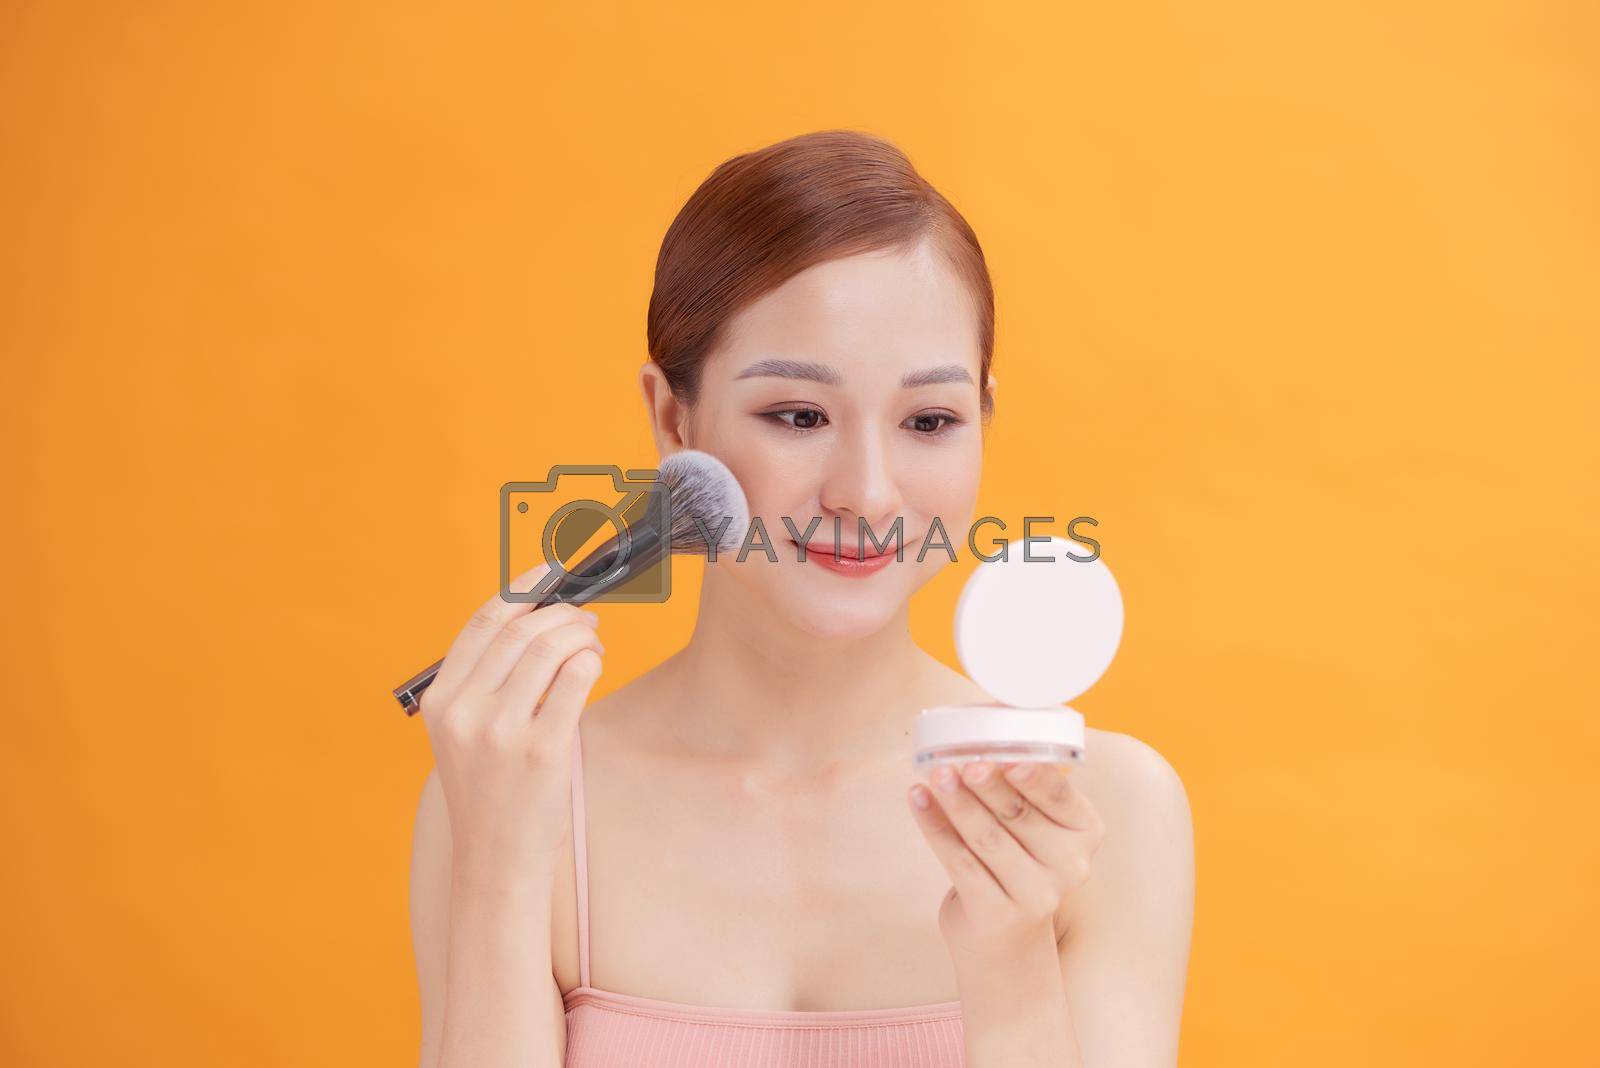 Beautiful woman applying blusher to her cheek with a large cosmetics brush while holding a compact mirror in front of her